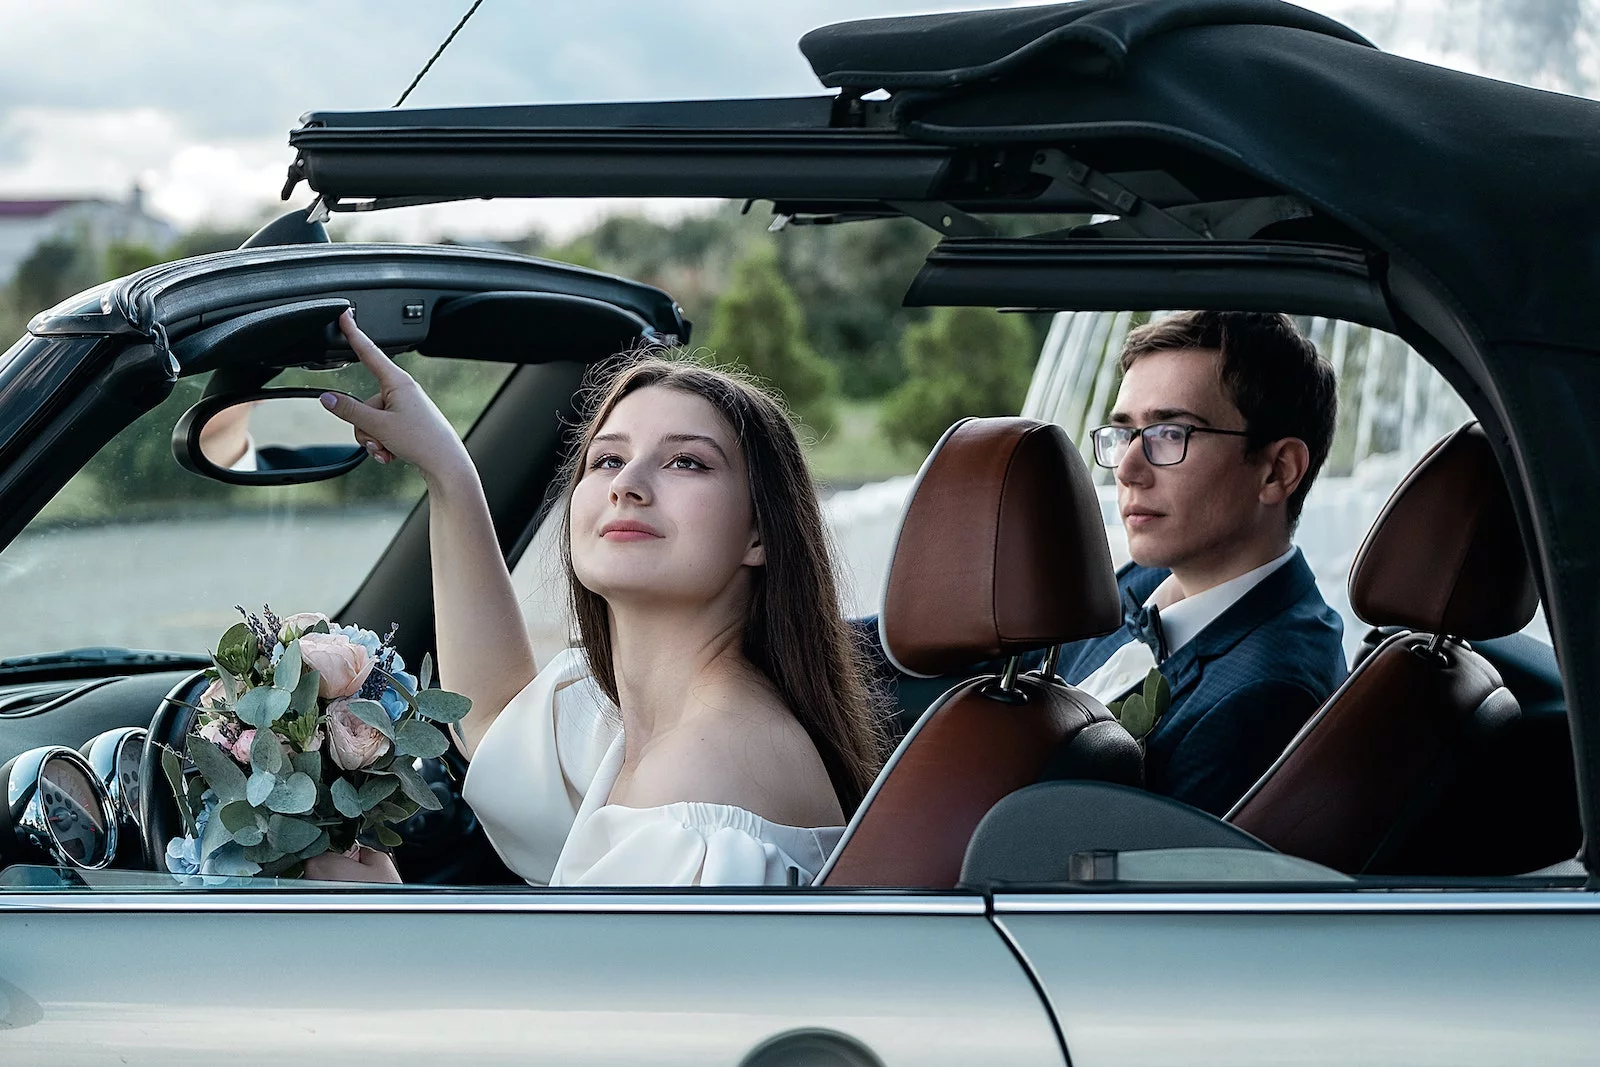 Do Married Couples Get Lower Auto Insurance Rates?